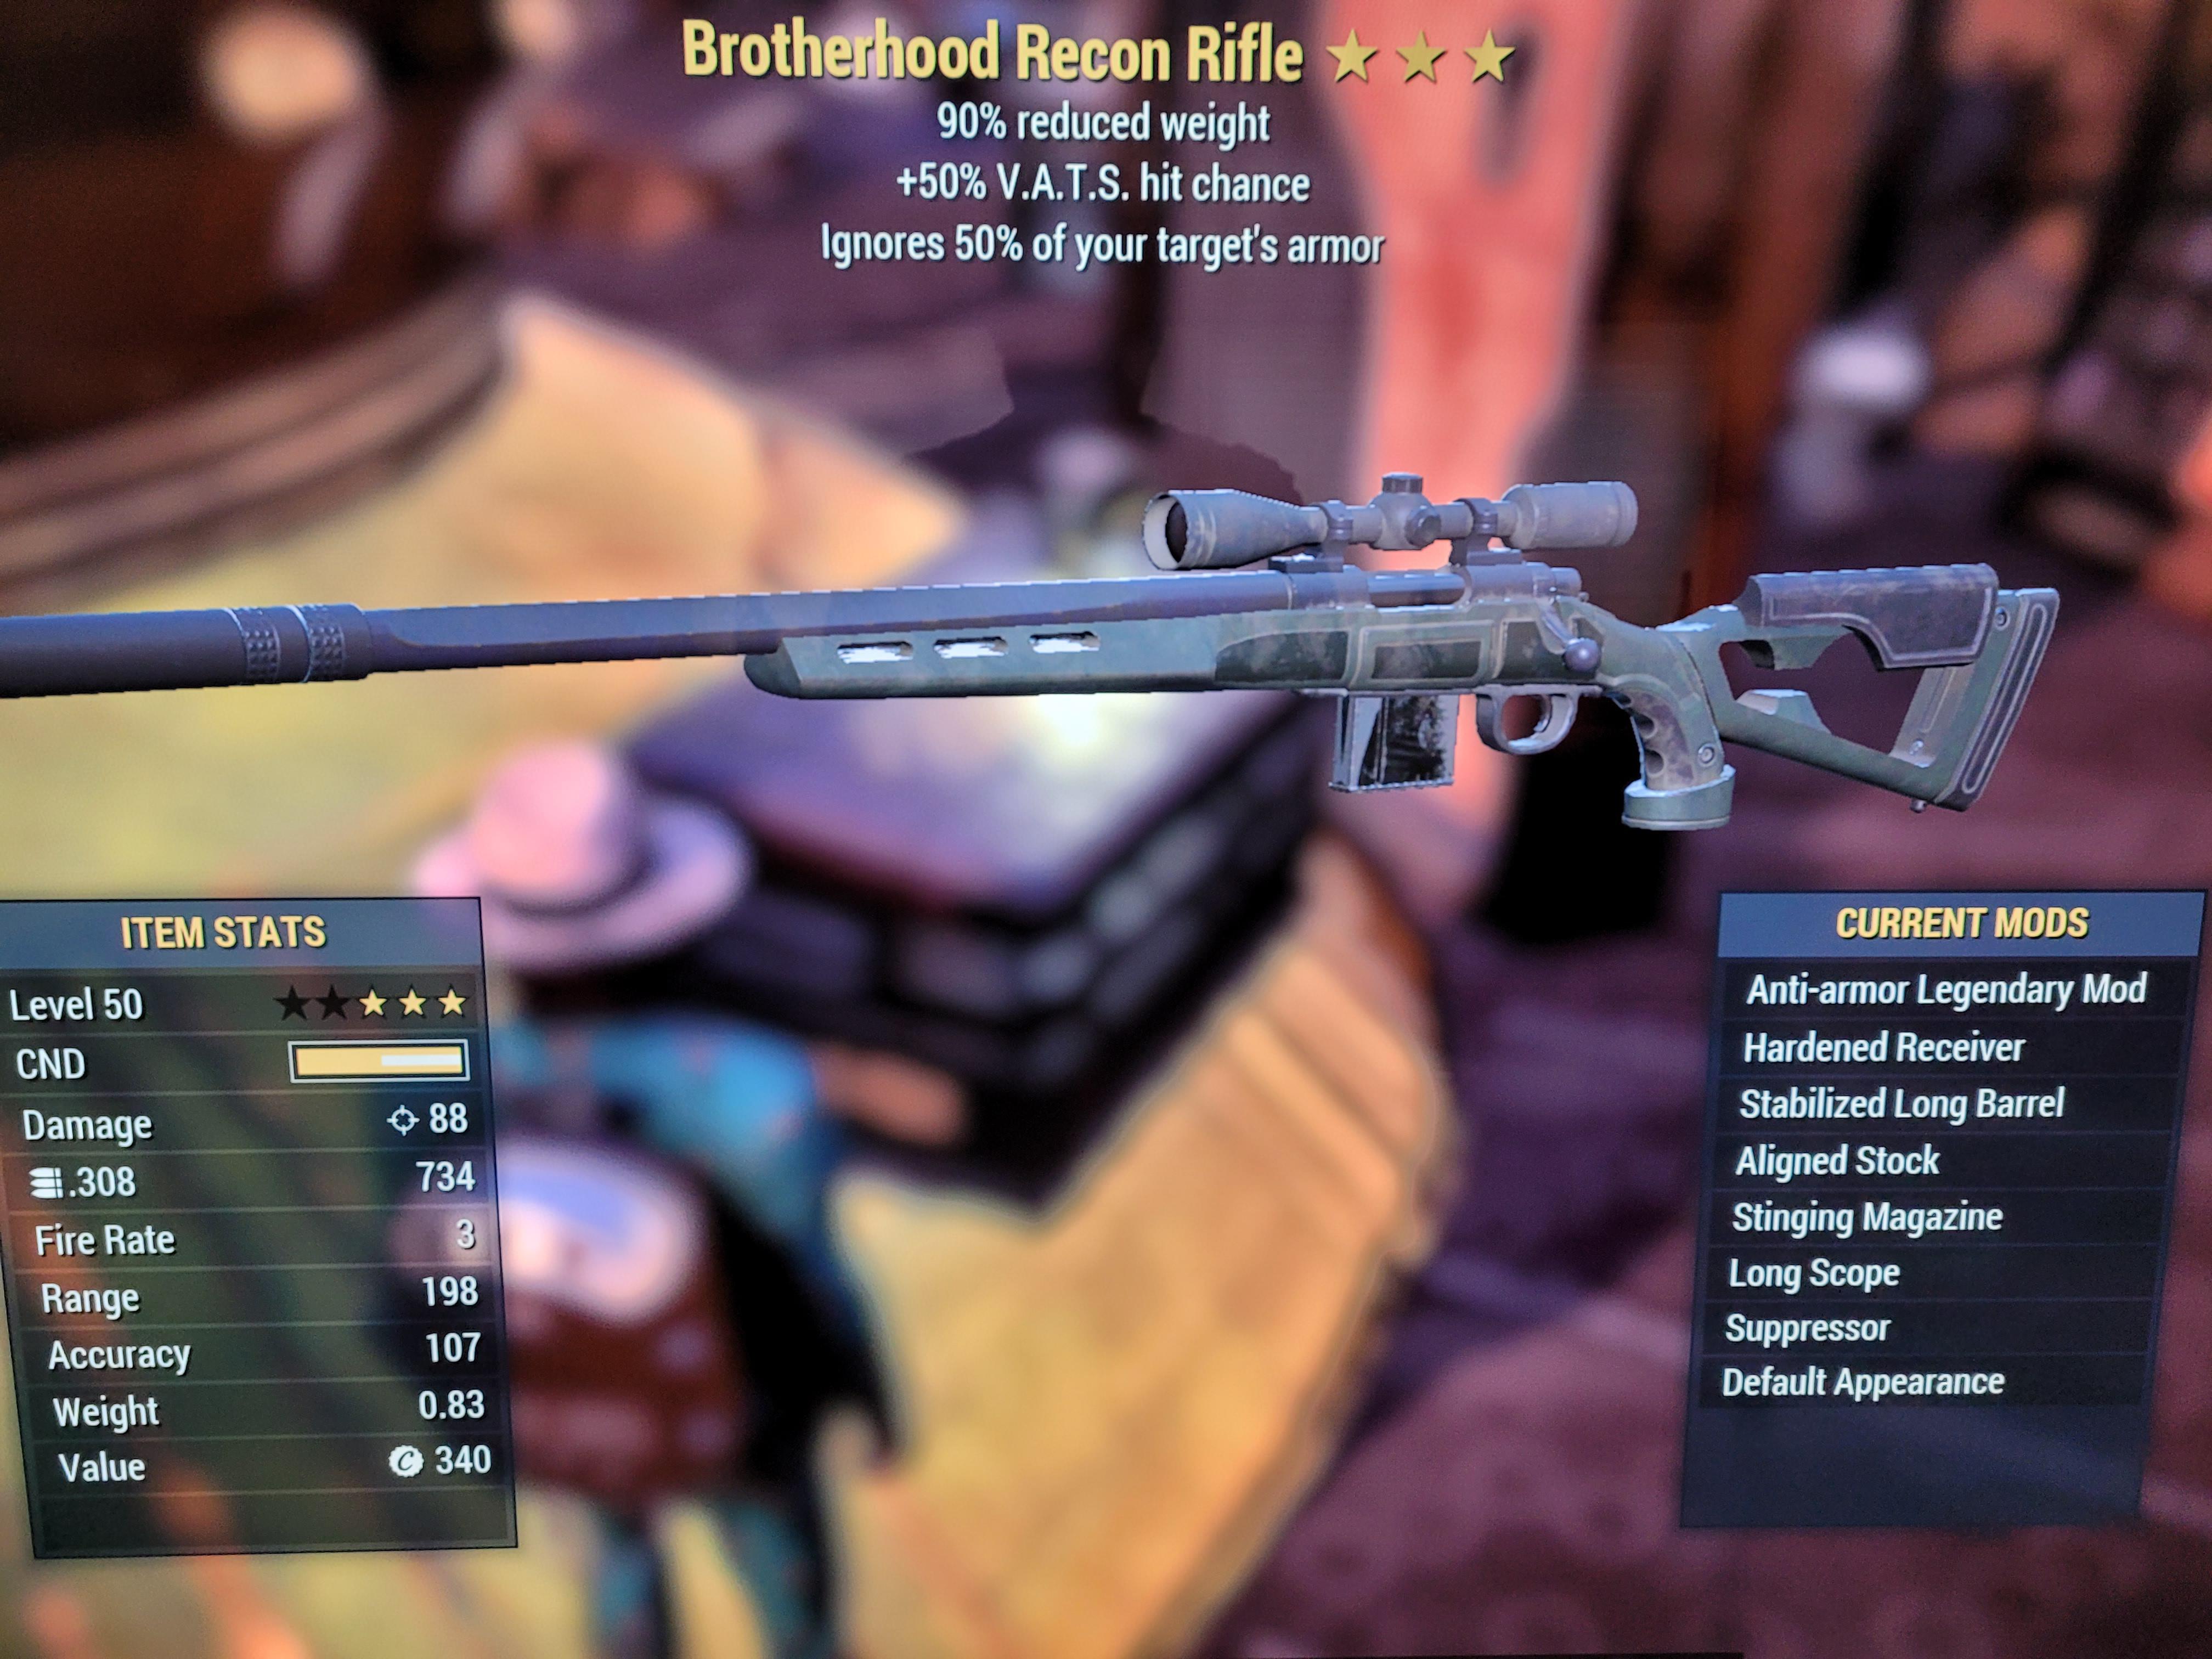 Brotherhood recon rifle with stats details in the left and current mods details in the right